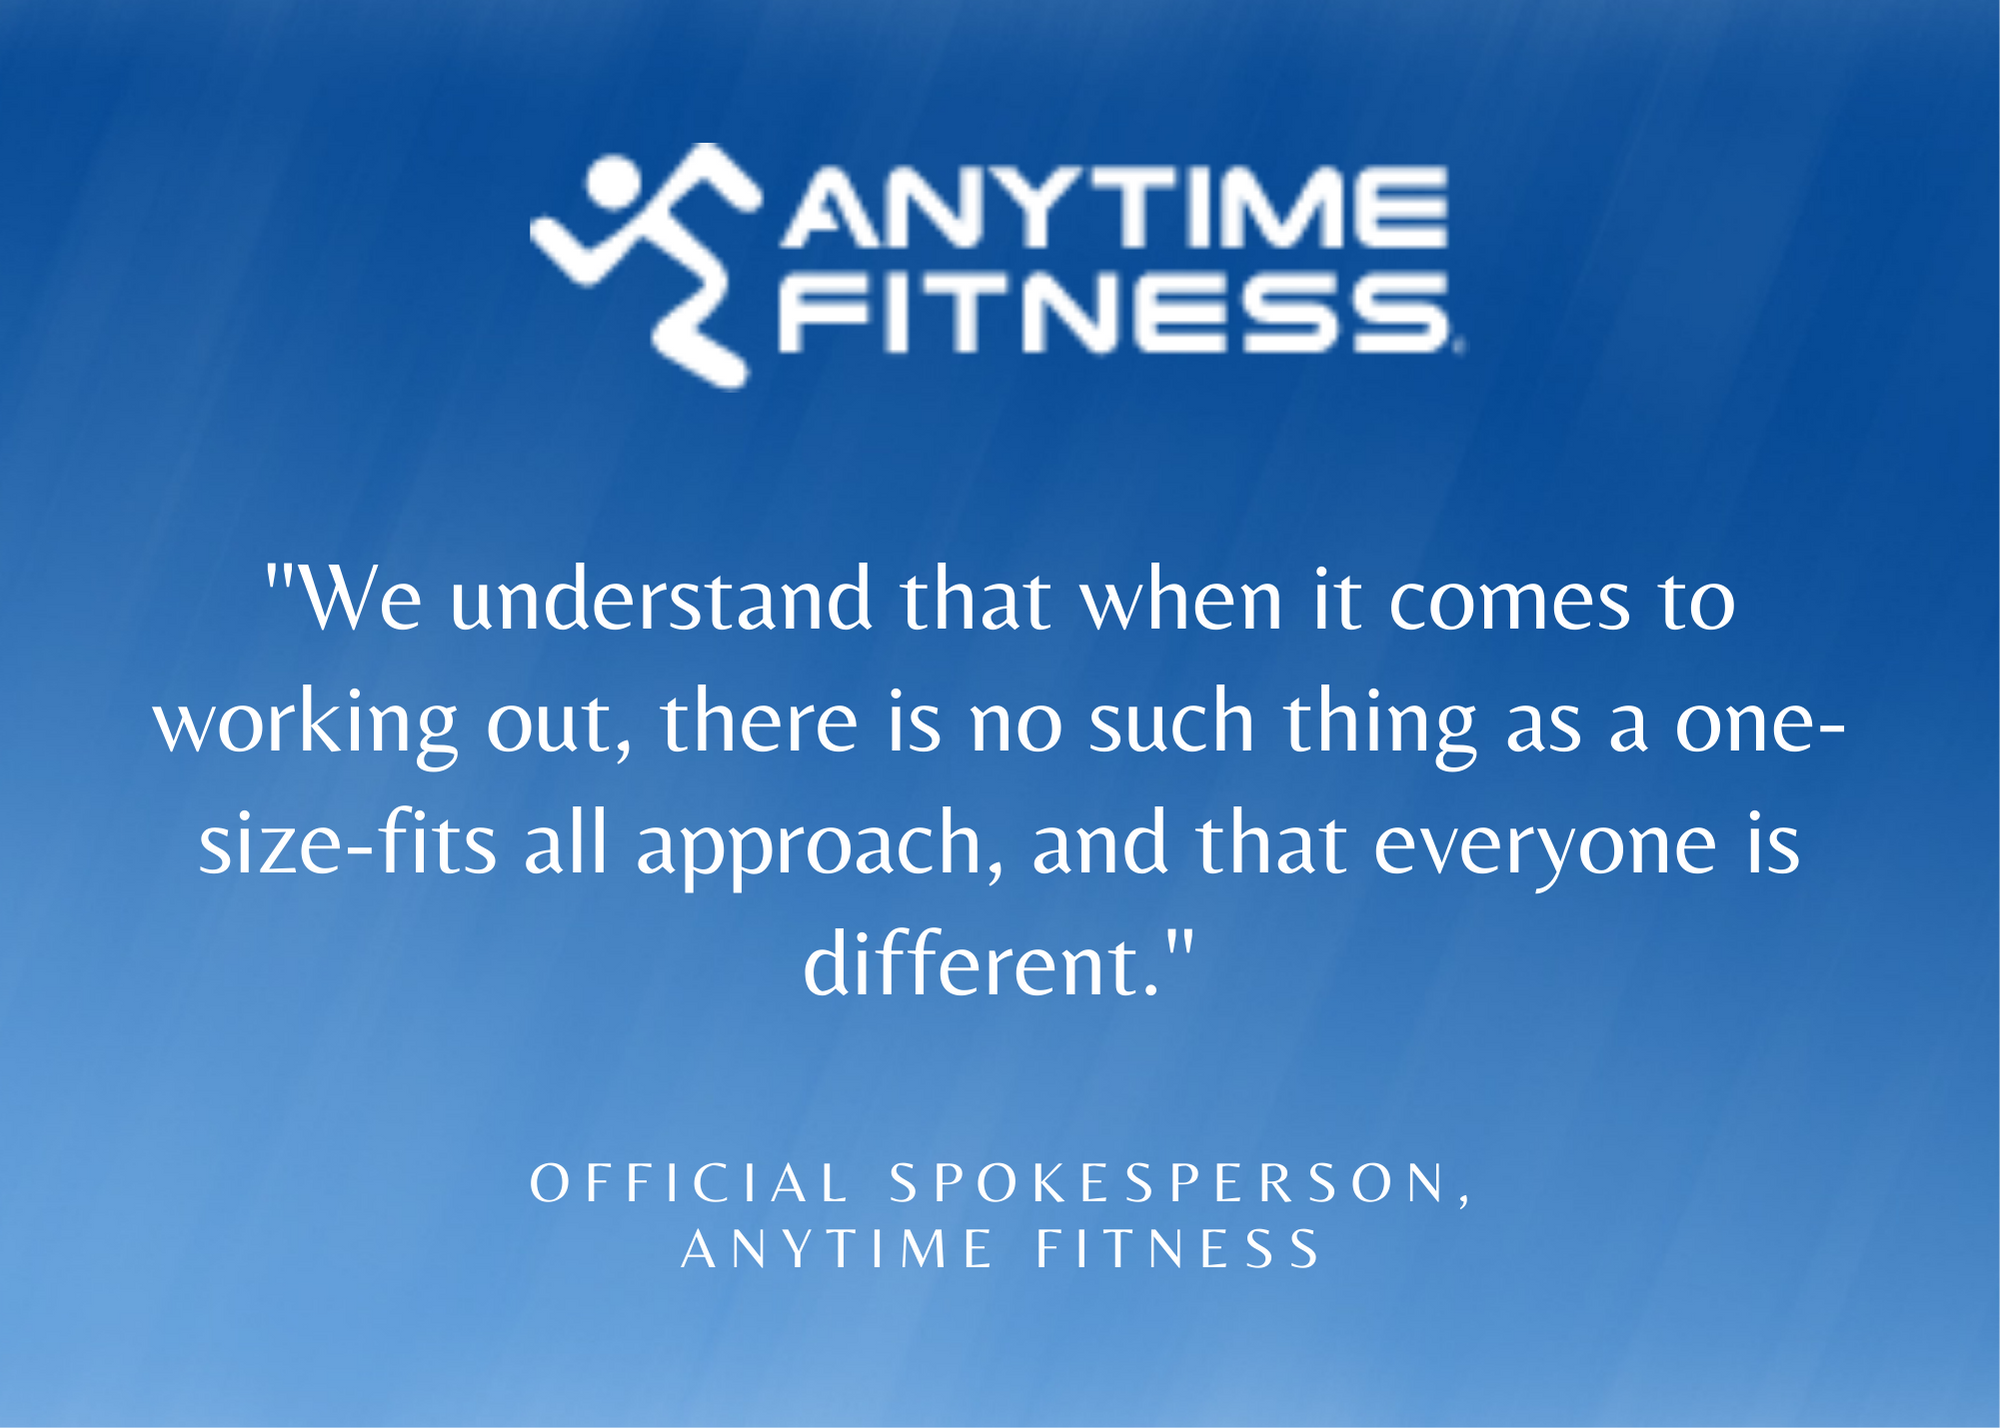 Anytime Fitness, Tuesday, July 5, 2022, Press release picture